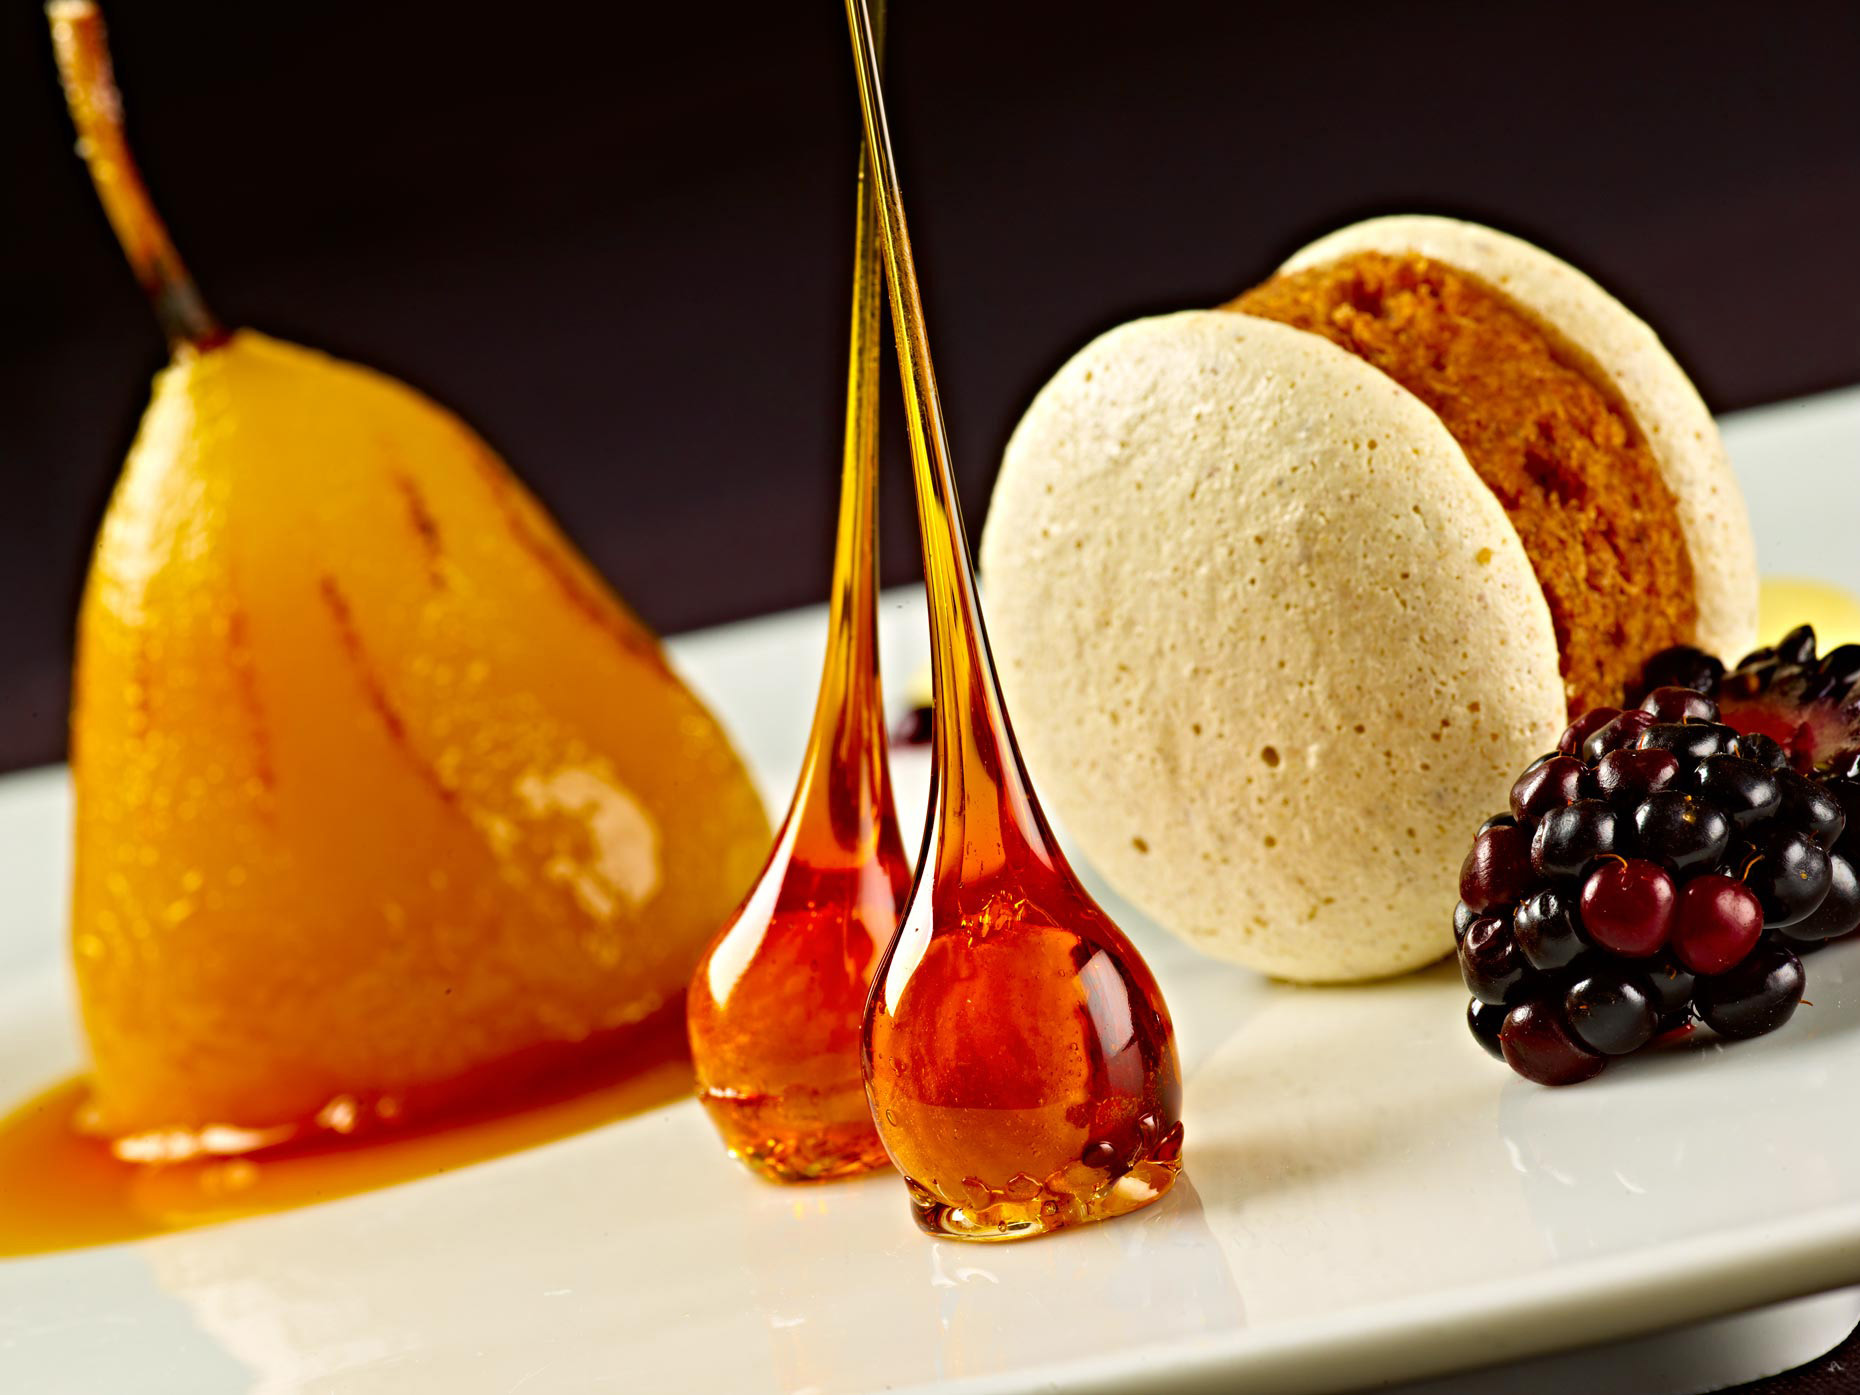 Dessert Photography | Poached Pear & Candied Hazlenuts | Desserttography